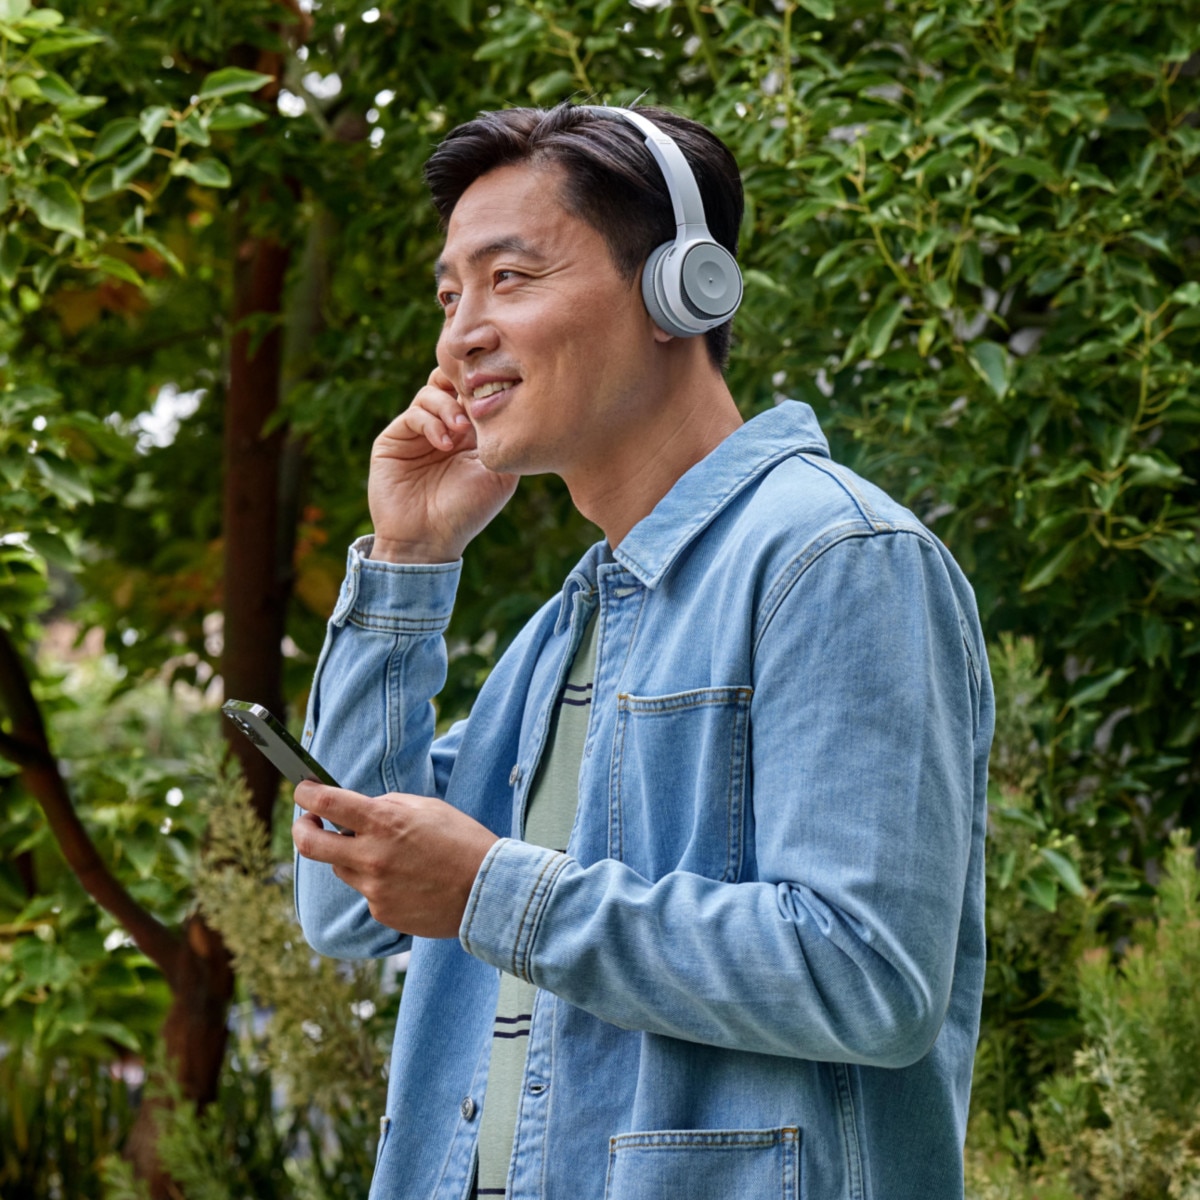 A person smiles while adjusting headphones and holding a mobile device outdoors.